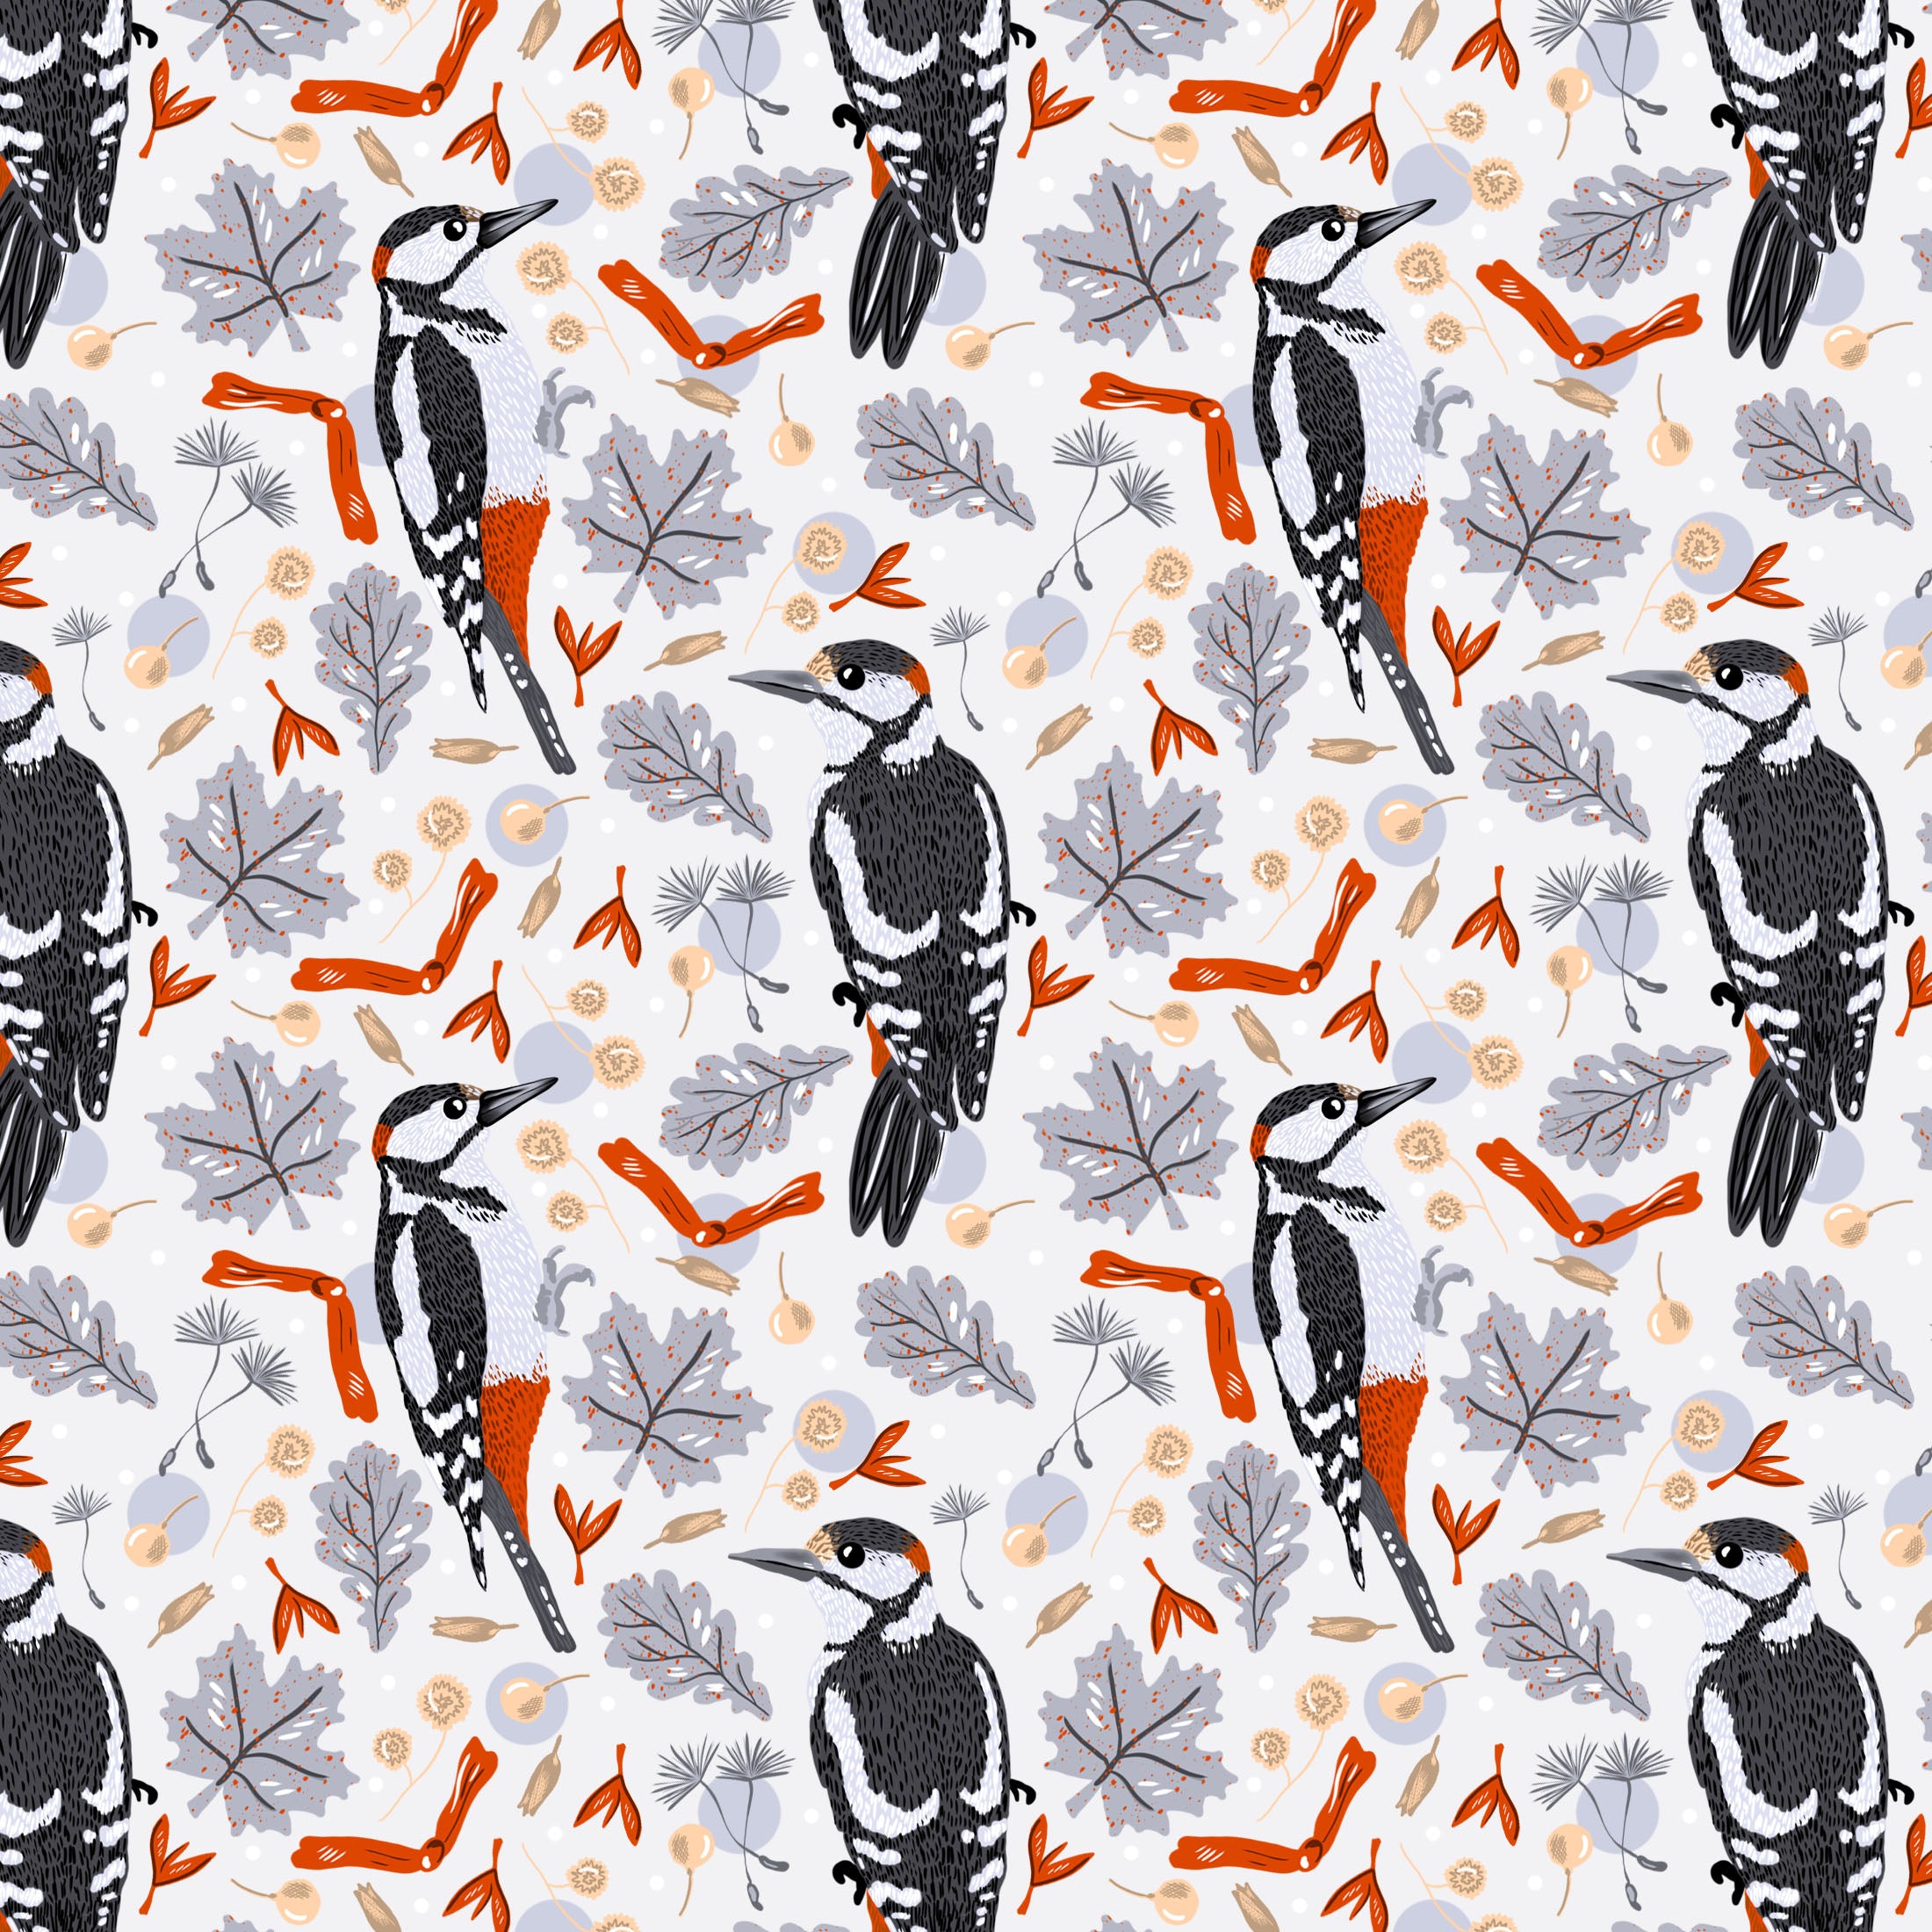 Woodpecker surface pattern design by Tahlia Paige